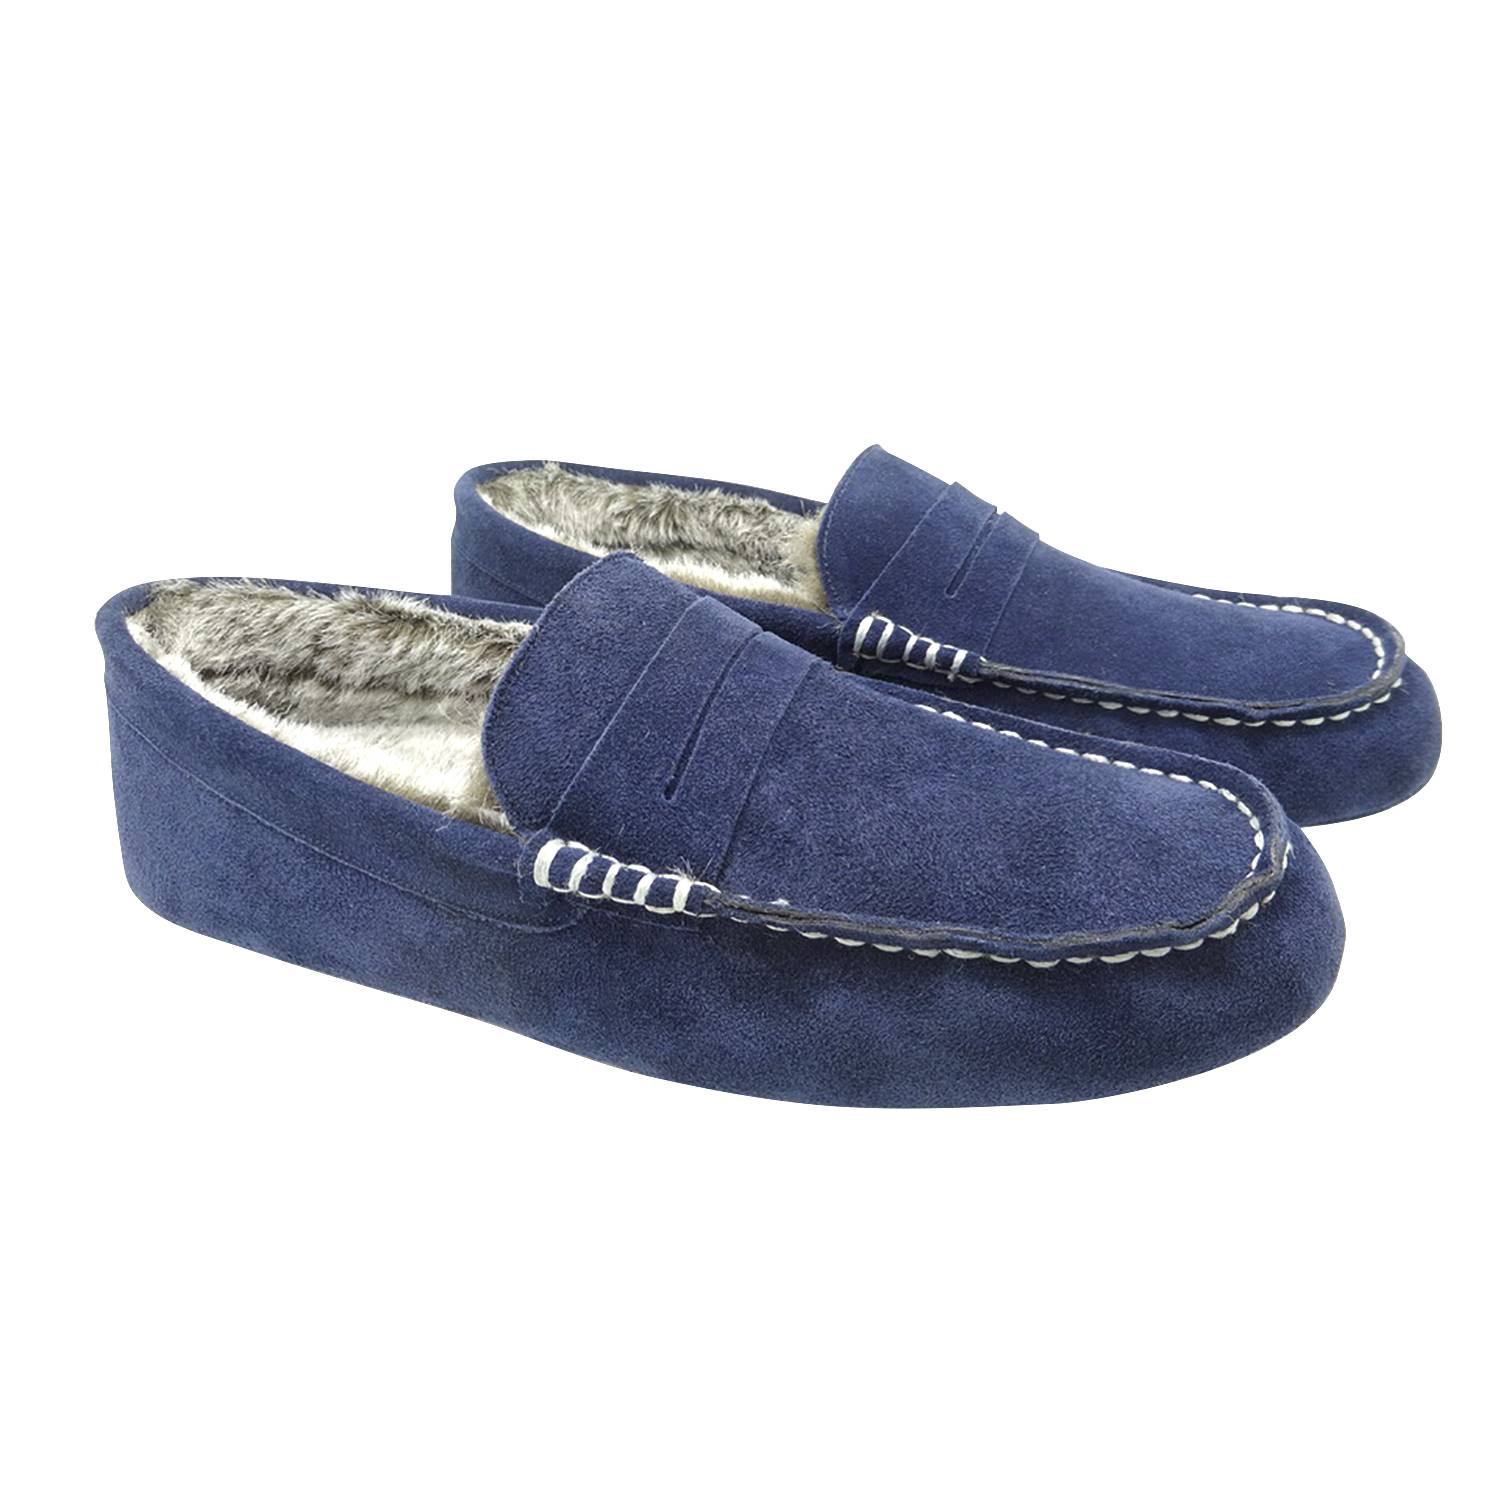 Mens Slippers Moccasins for Men Cozy Pile Lined with Microsuede Upper Indoor Outdoor On House Shoes